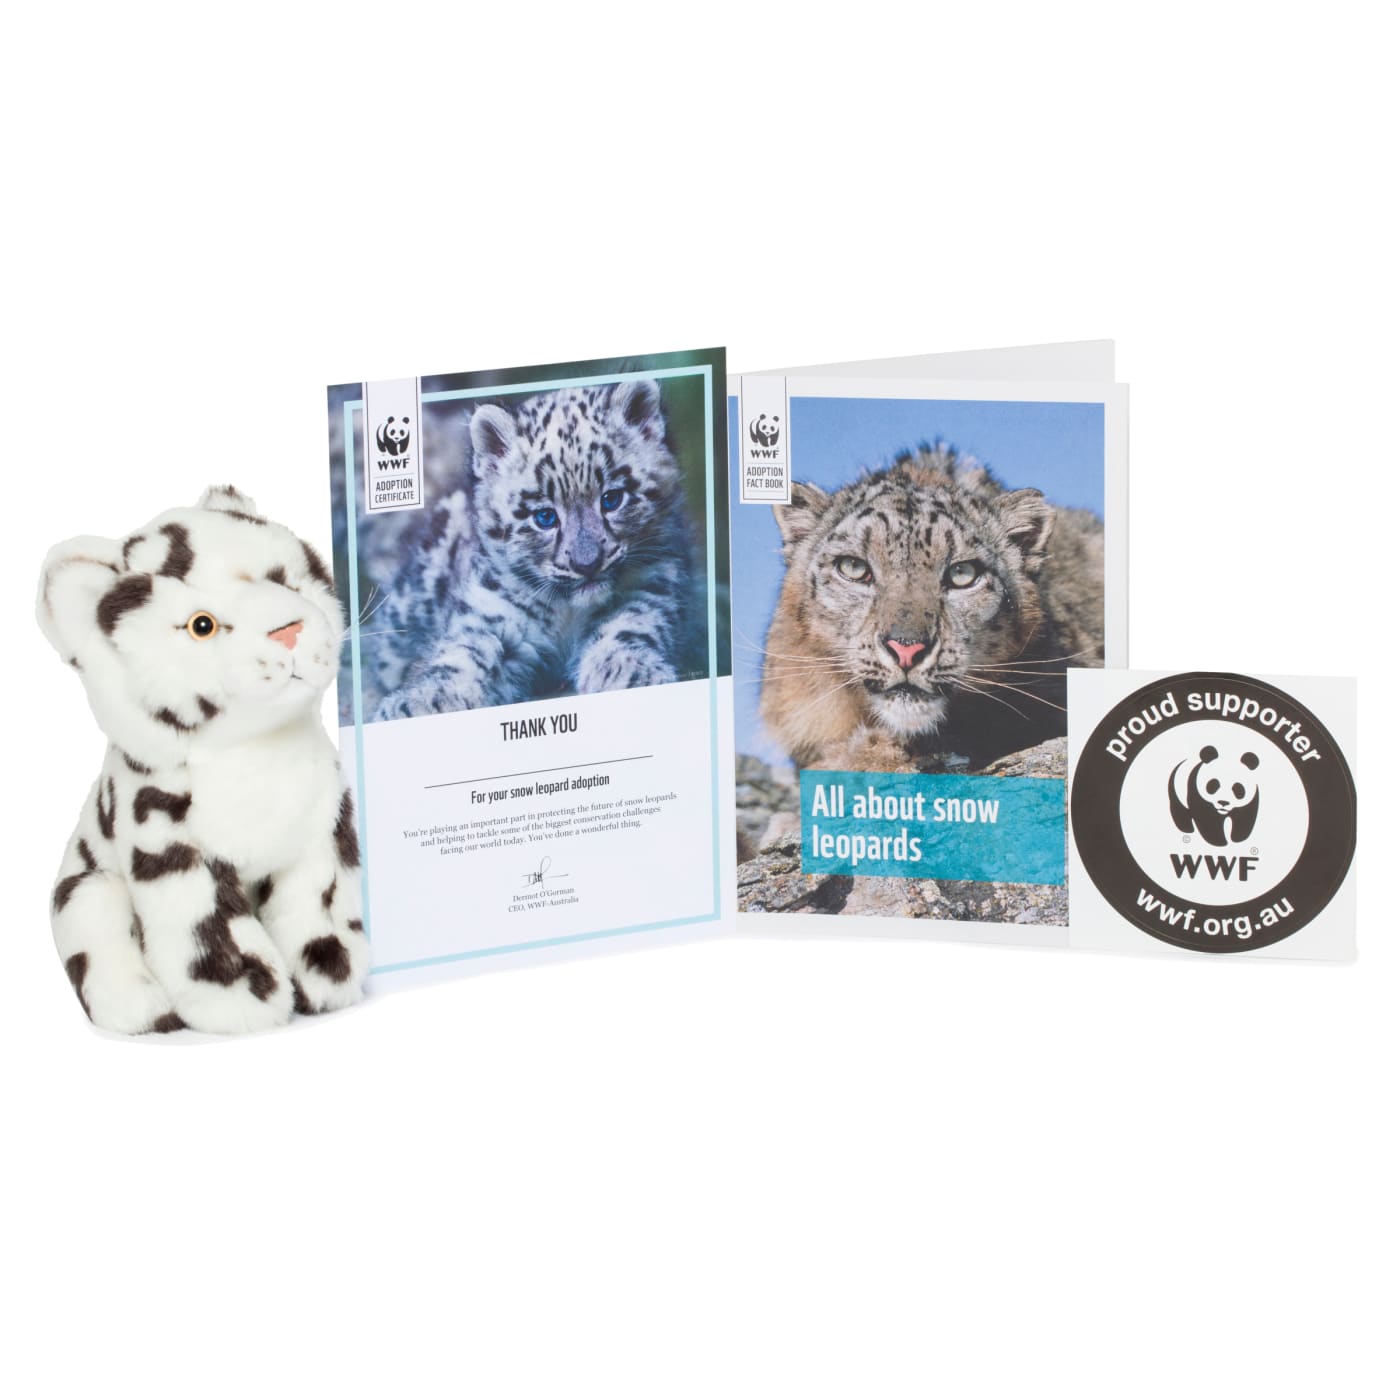 Contents of snow leopard adoption pack, including snow leopard plushie, adoption certificate and snow leopard booklet